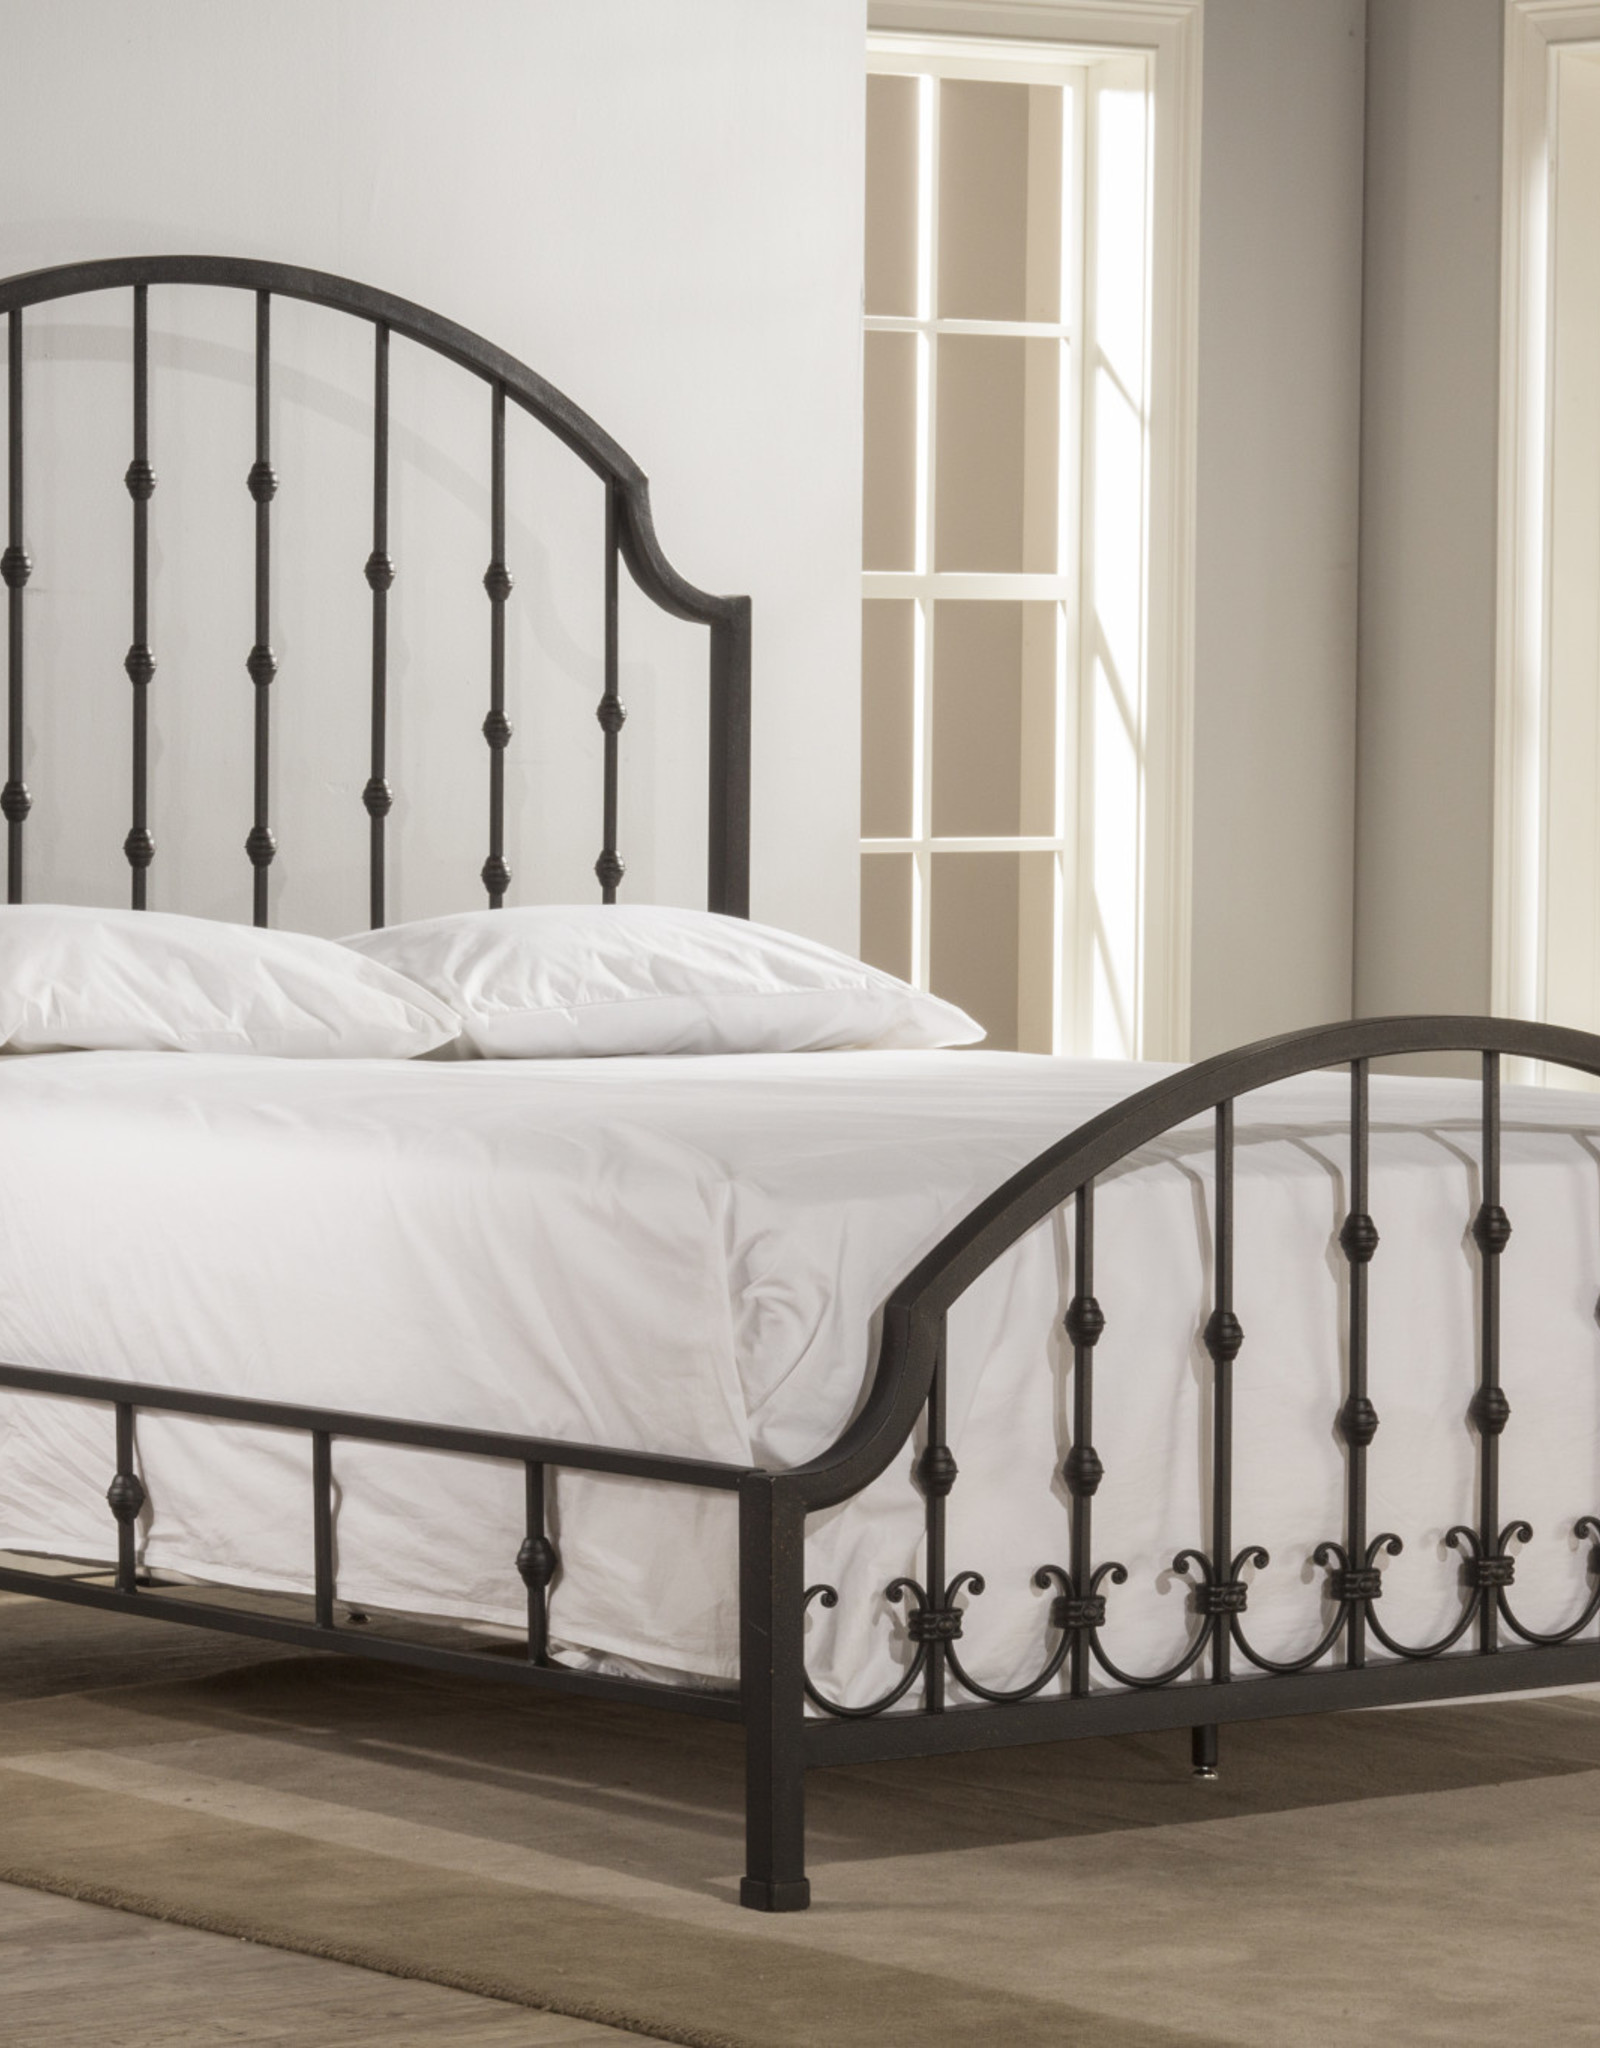 Westgate Bed (Includes headboard, footboard, and rails)